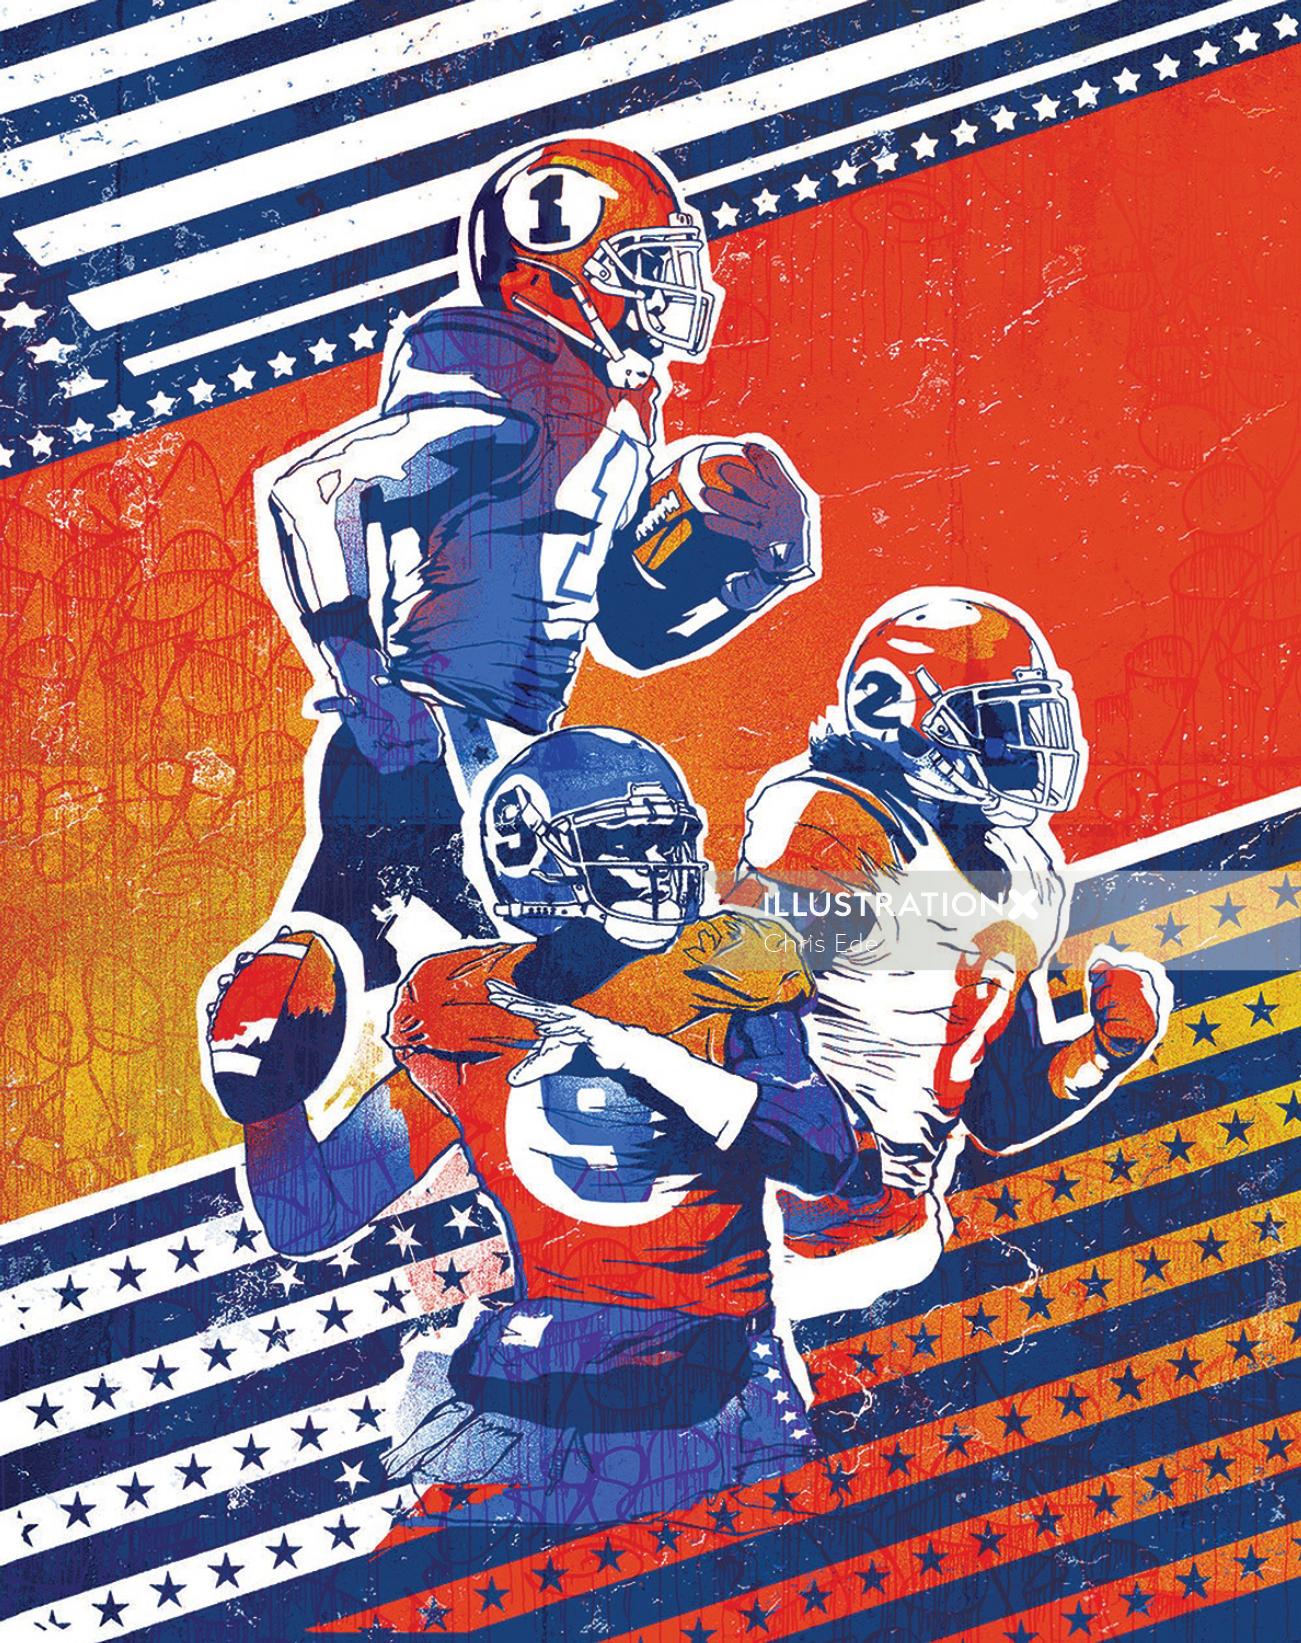 Illustration for American football magazine by Chris Ede